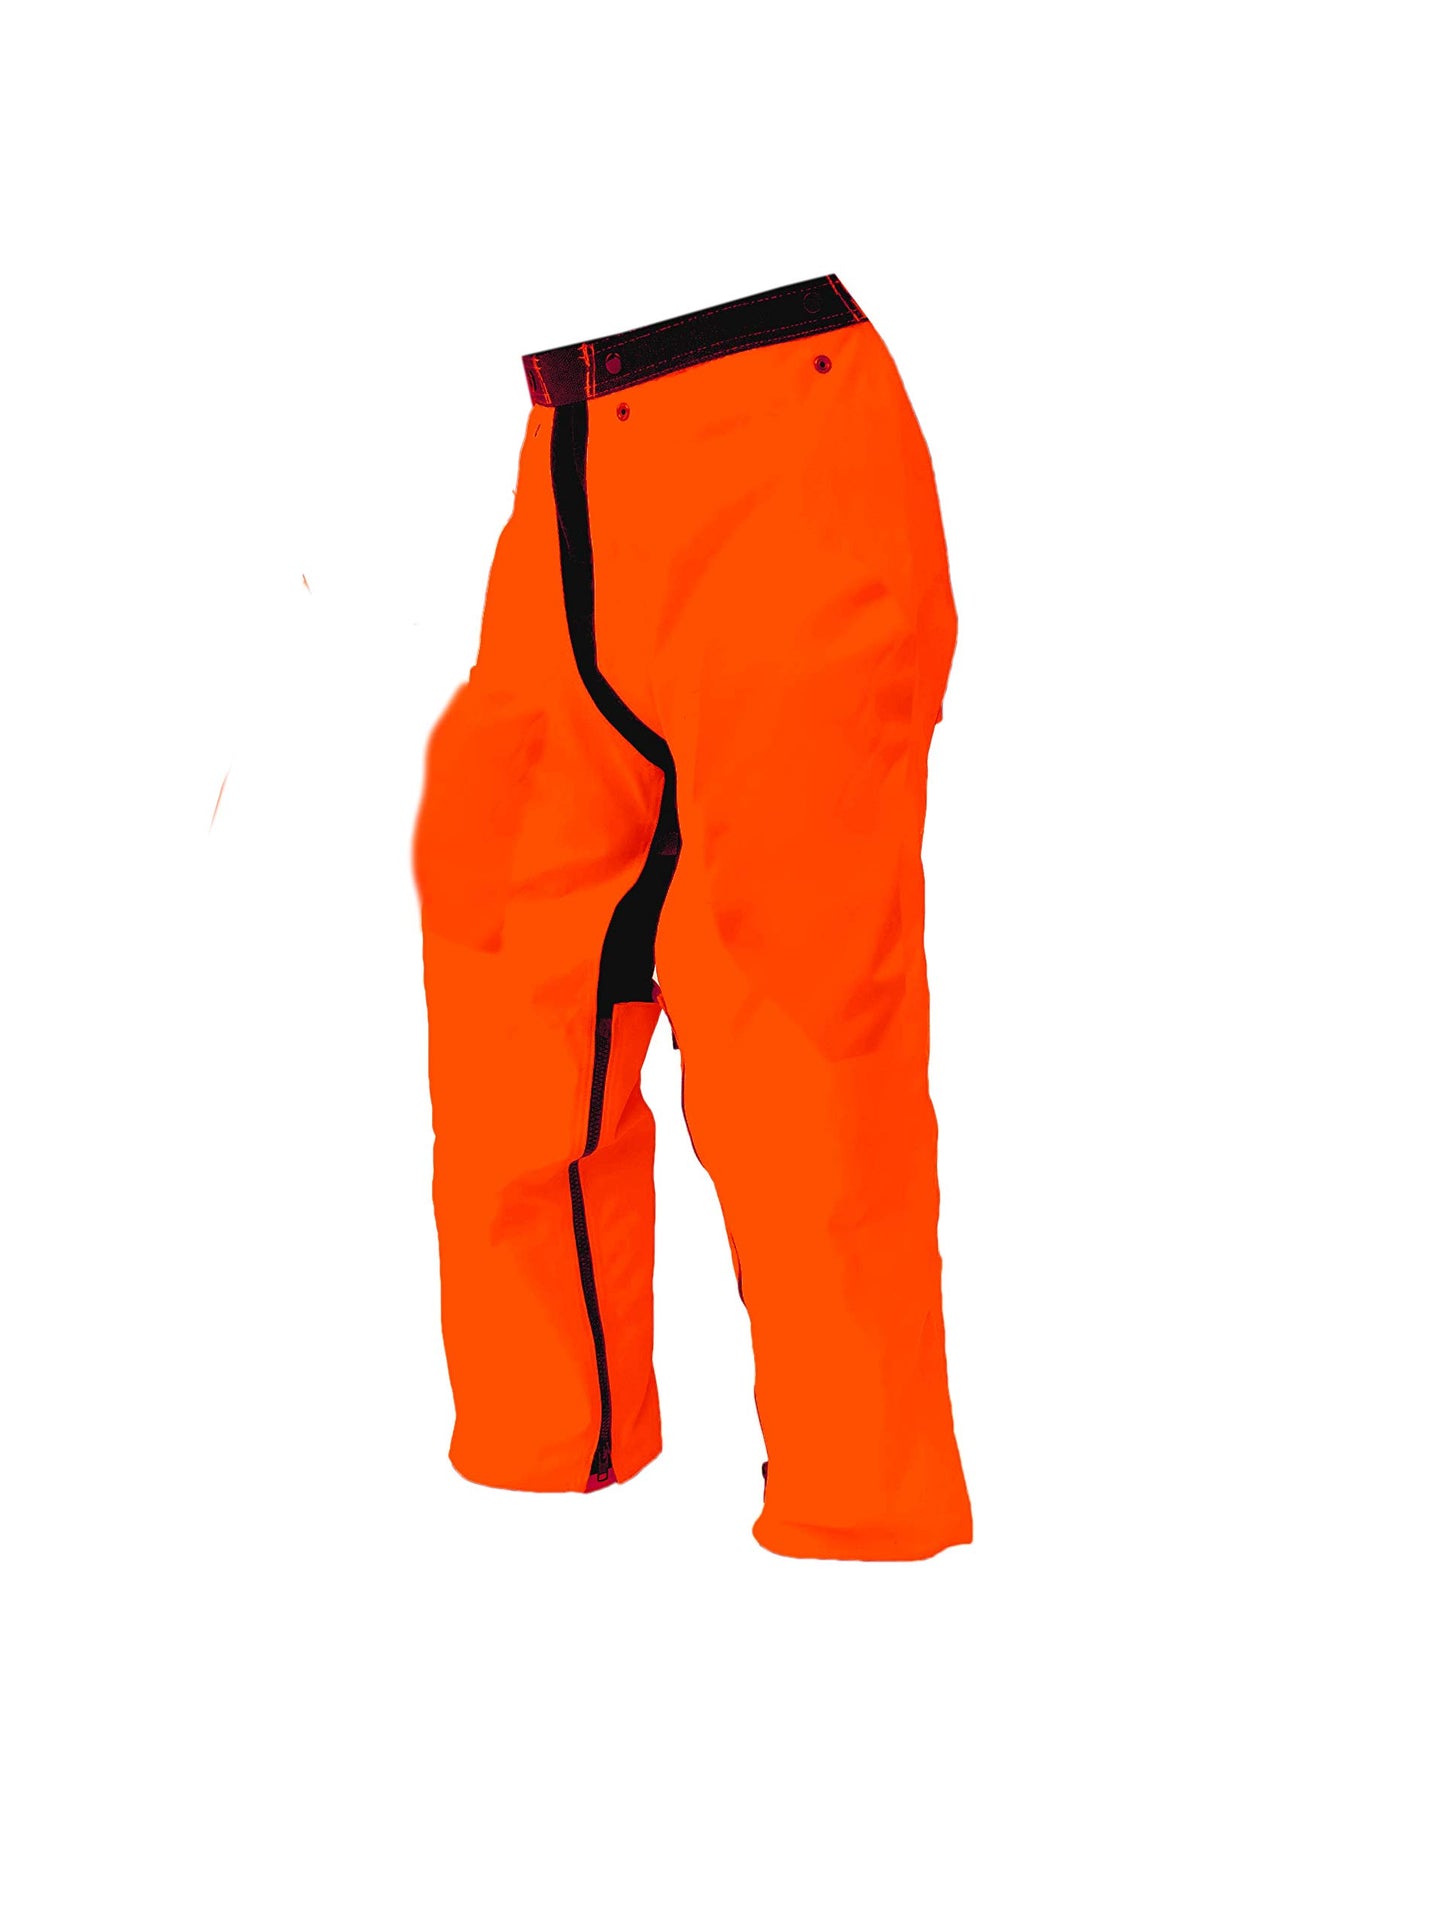 Forester Chainsaw Safety Chaps - Full Wrap Zipper - Orange (Long (40") Fits M...